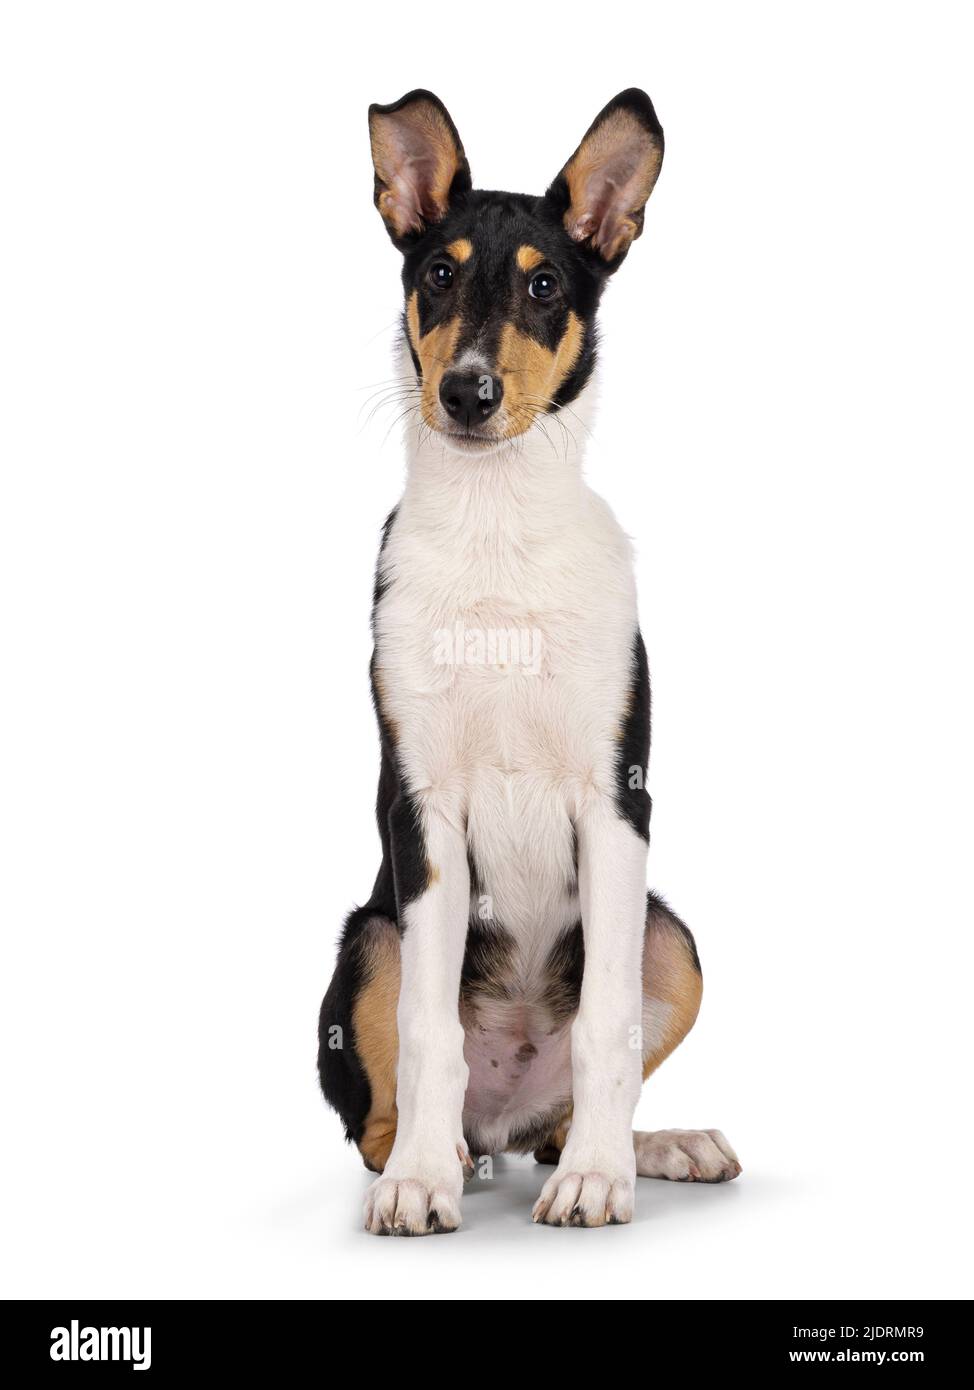 Cute young Smooth Collie dog, sitting up facing front. Looking towards camera. Isolated on a white background. Stock Photo